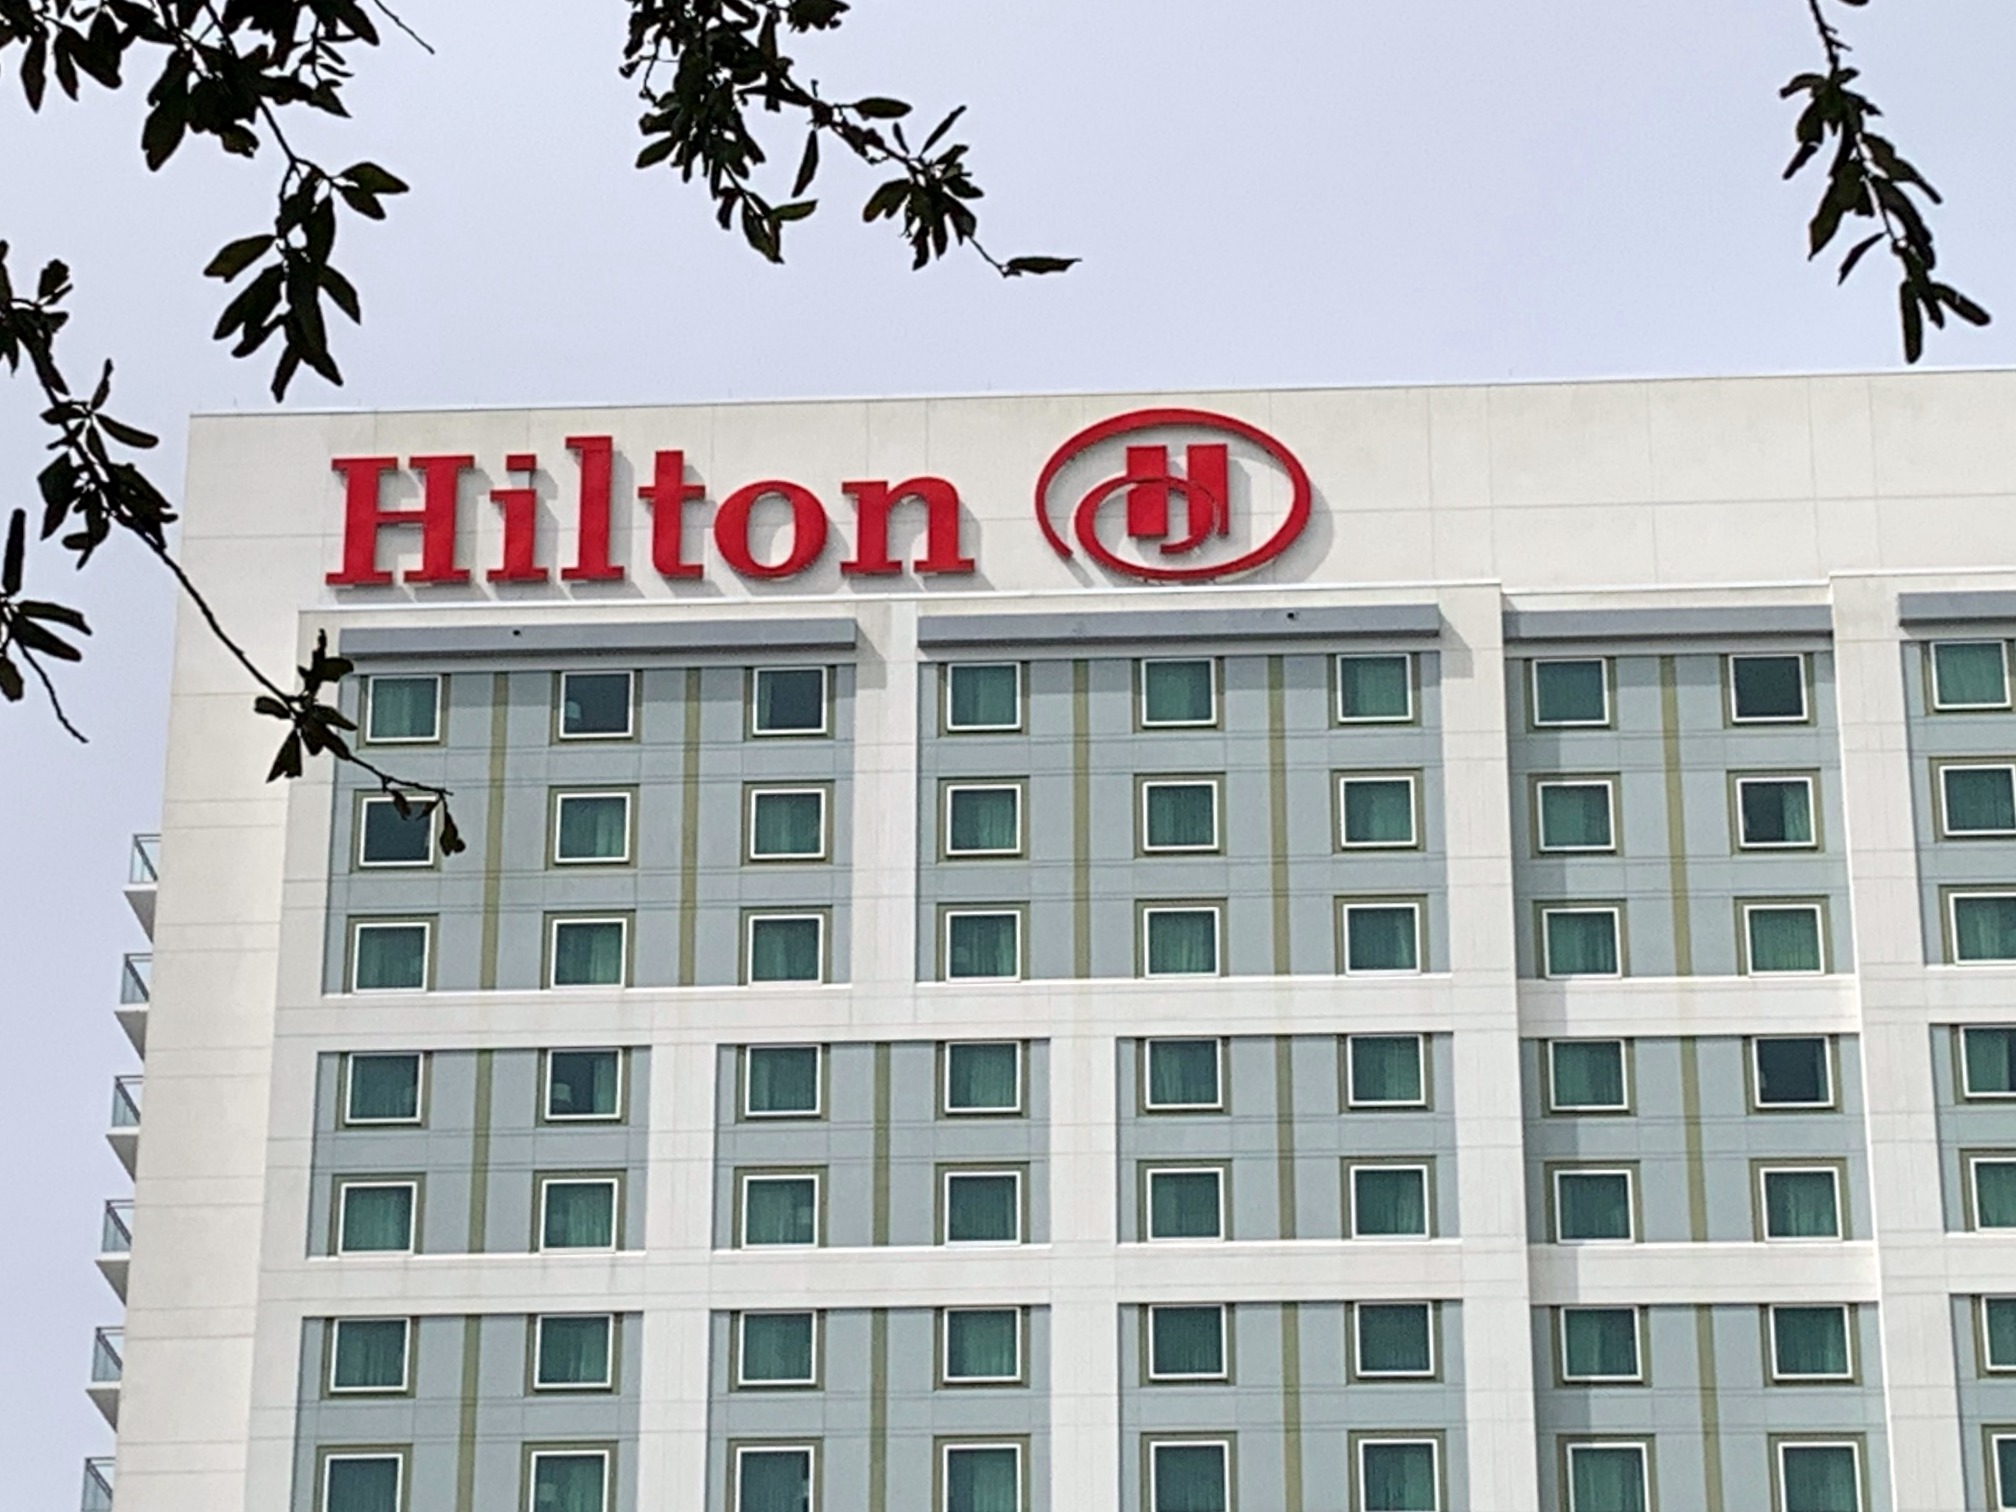 Win 56,000 Hilton Points with Super Bowl Twitter Promotion